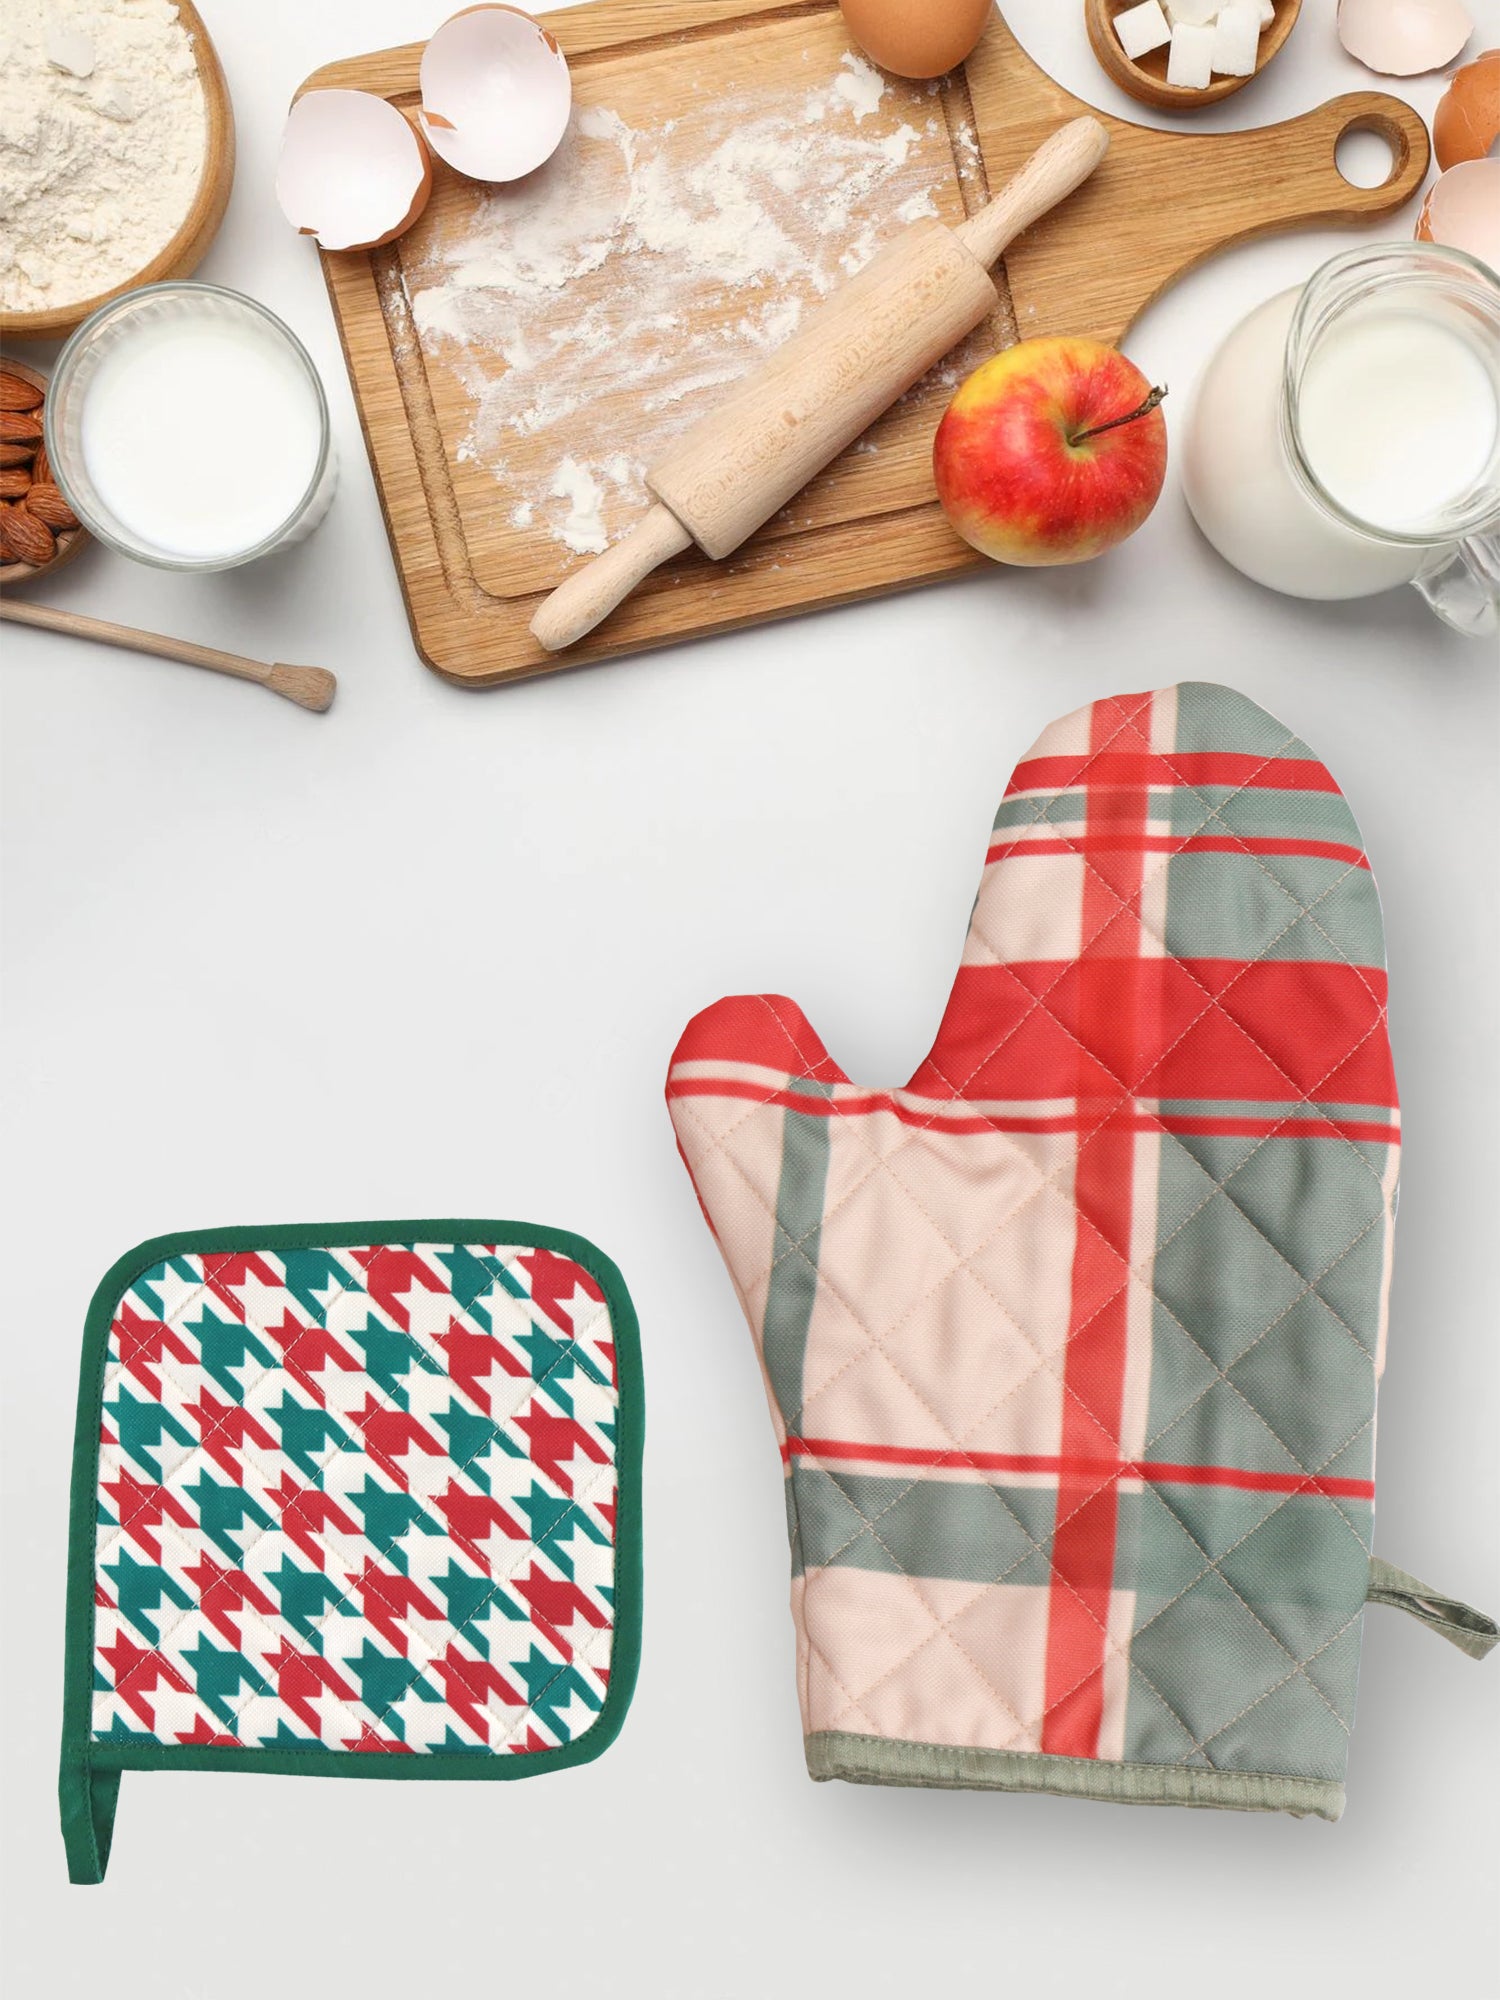 Yourtablecloth Set of Checkered Oven Mitt and Pot Holder or Oven Gloves-100% Cotton, Heat Resistance, Superior Protection & ComfortGingham Design